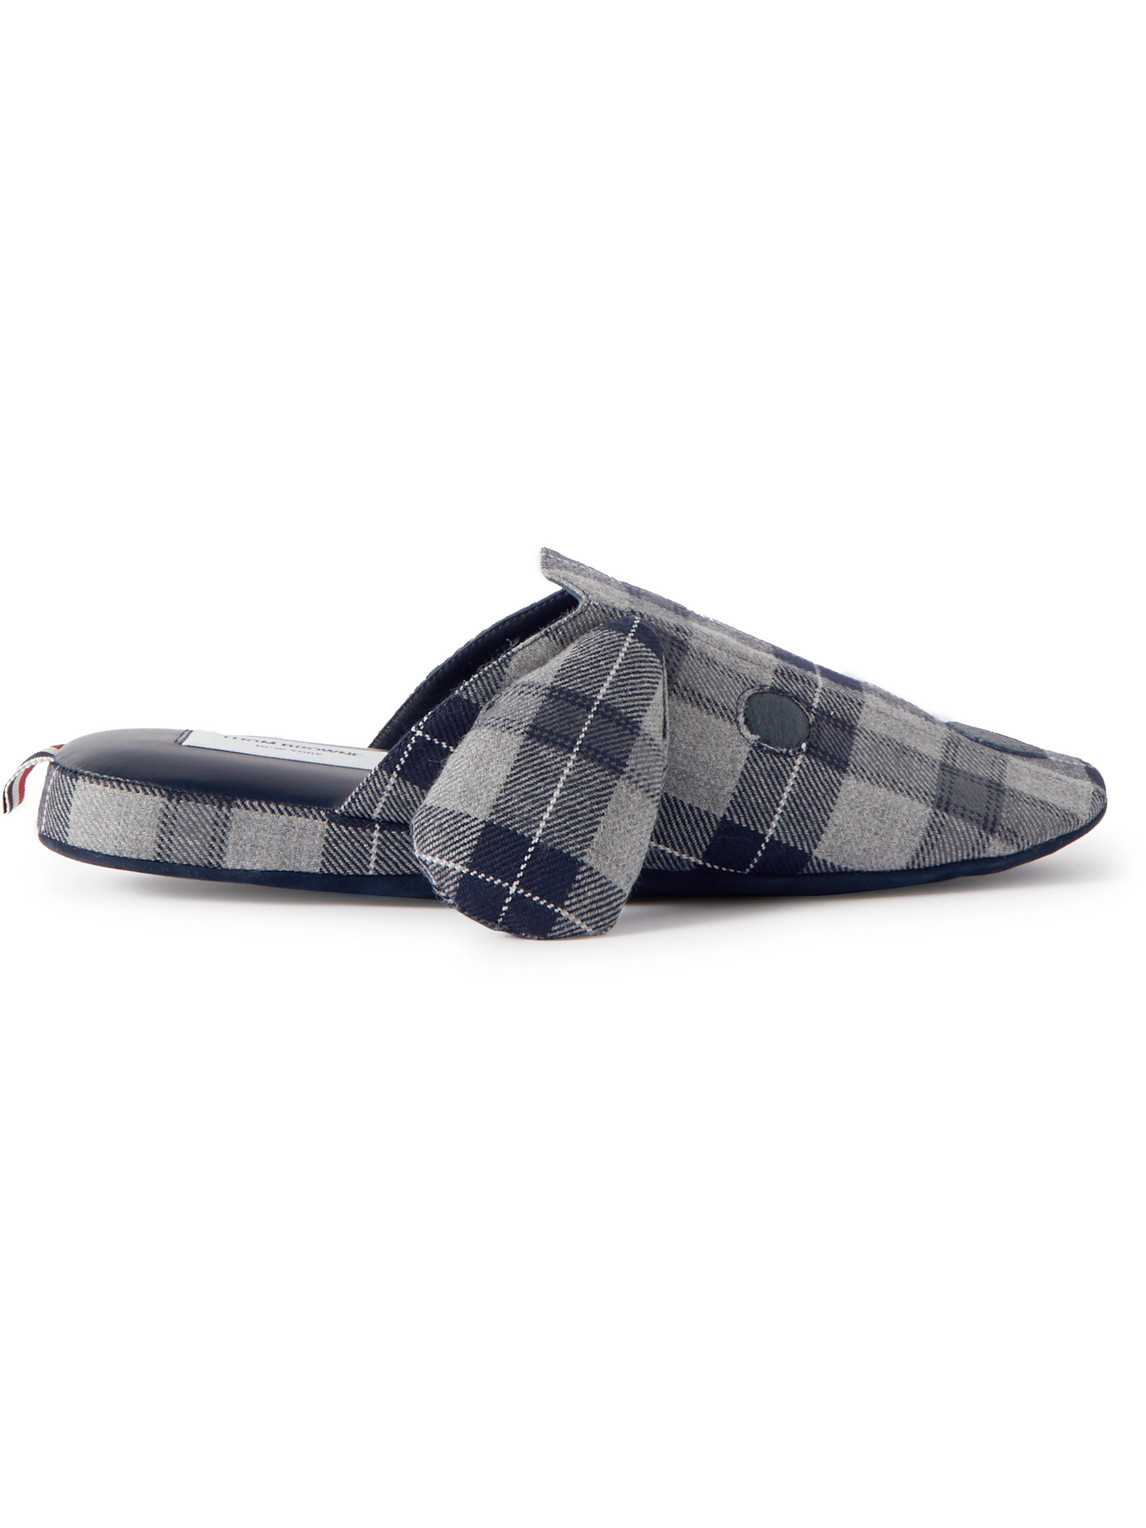 Thom Browne Hector Leather-Trimmed Checked Wool-Flannel Slippers